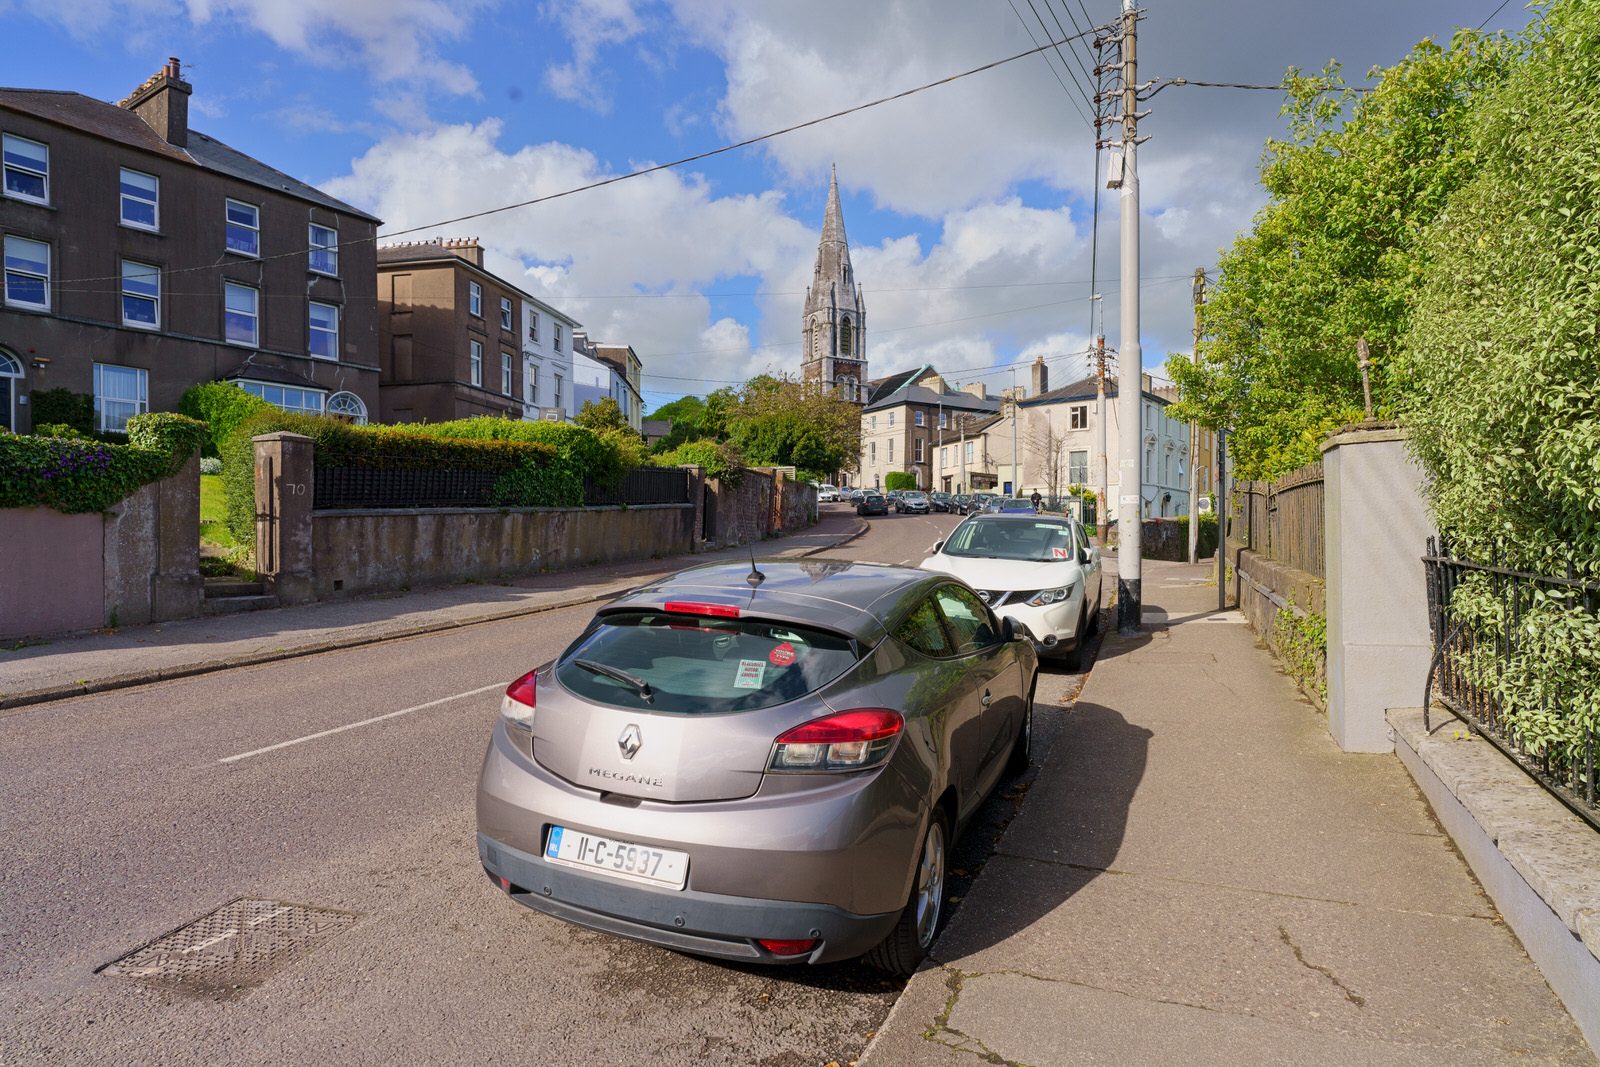 A WALK ALONG SUMMERHILL NORTH [IN CORK EVERYWHERE IS UPHILL OR DOWNHILL]-225827-1